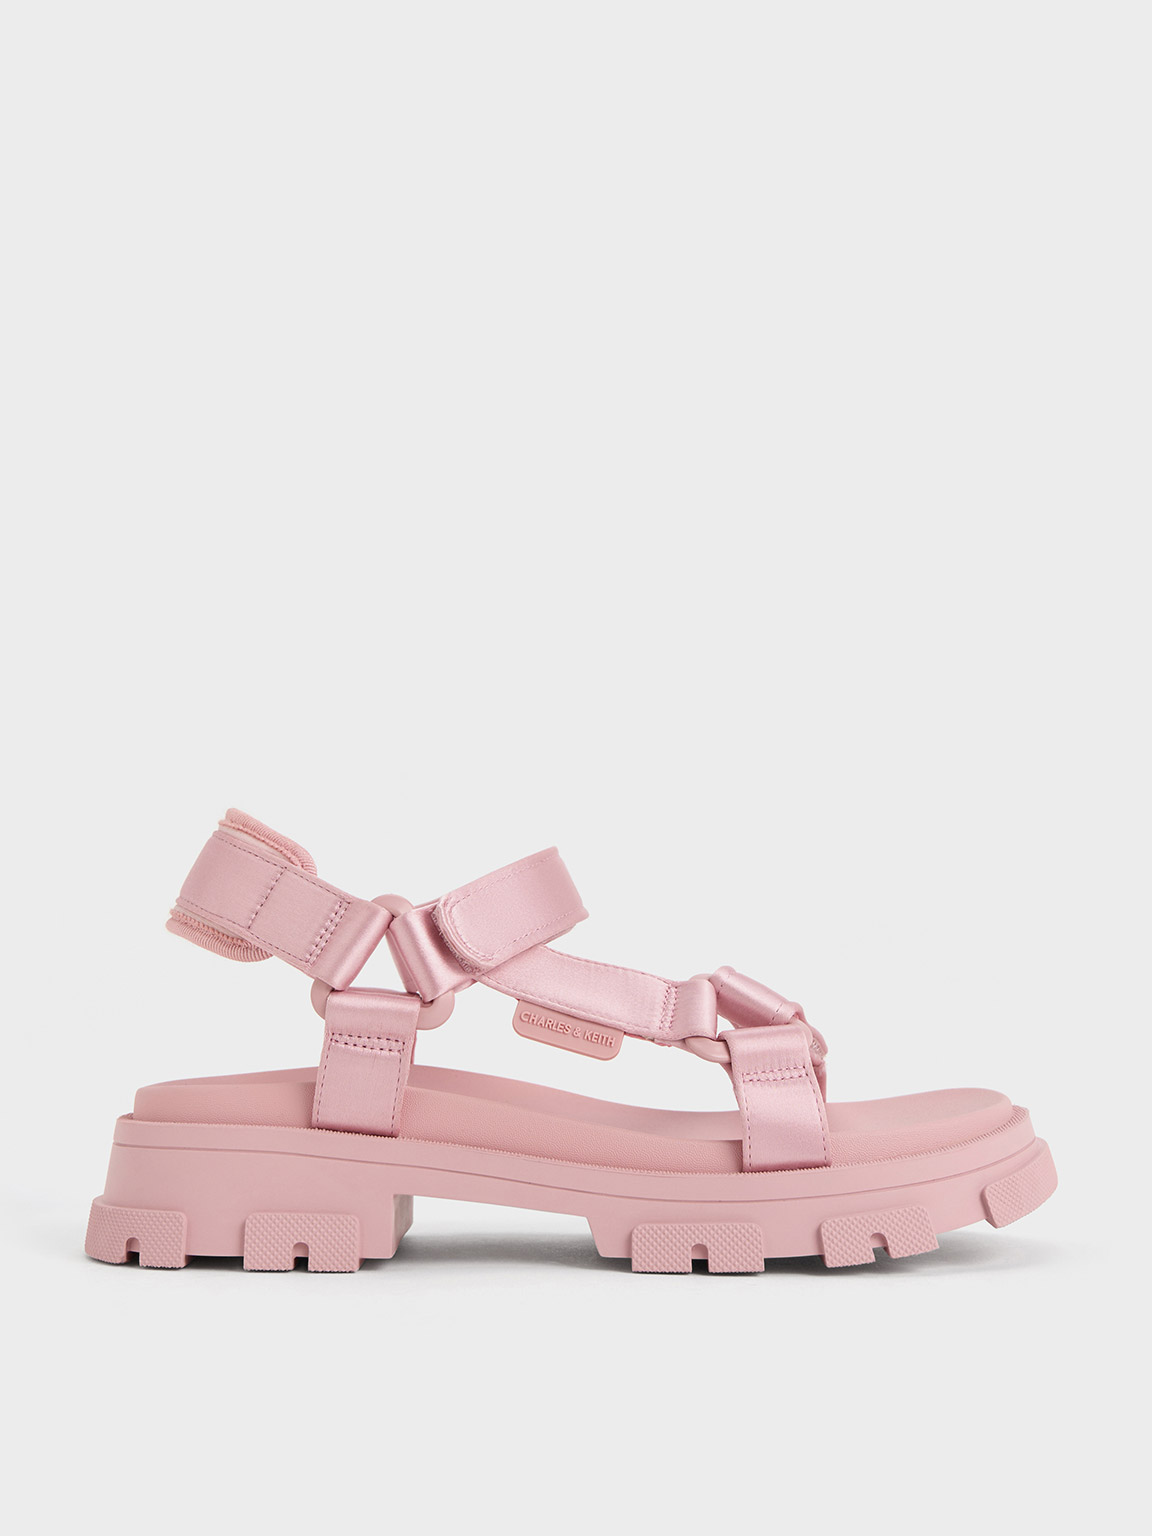 Charles & Keith Girls' Satin Sports Sandals In Pink